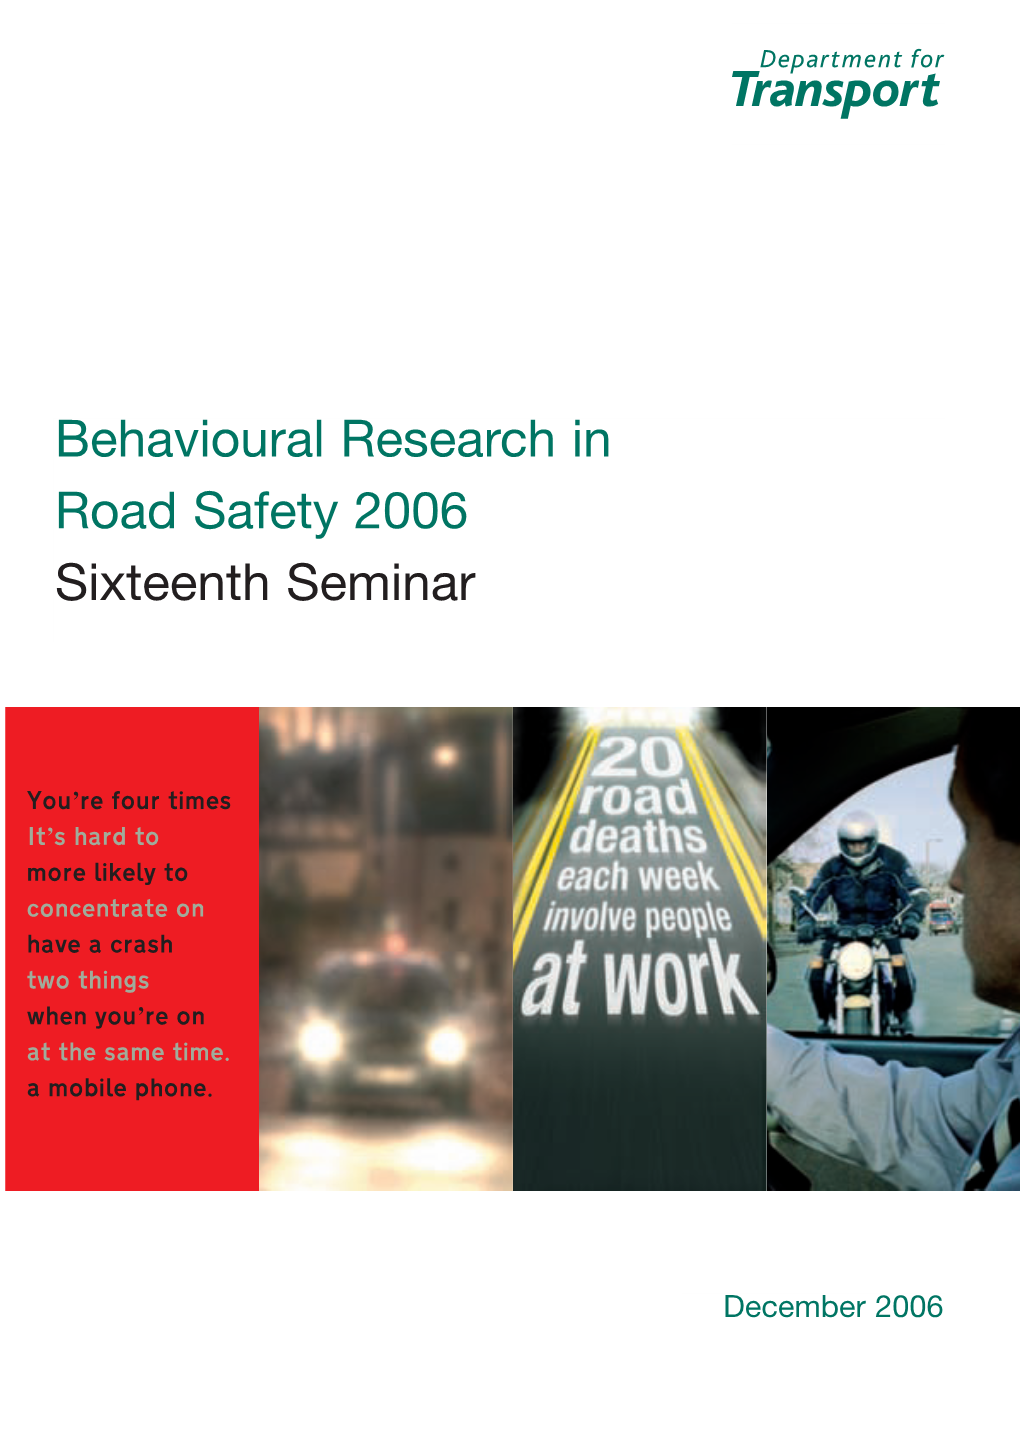 Behavioural Research in Road Safety 2006: Sixteenth Seminar